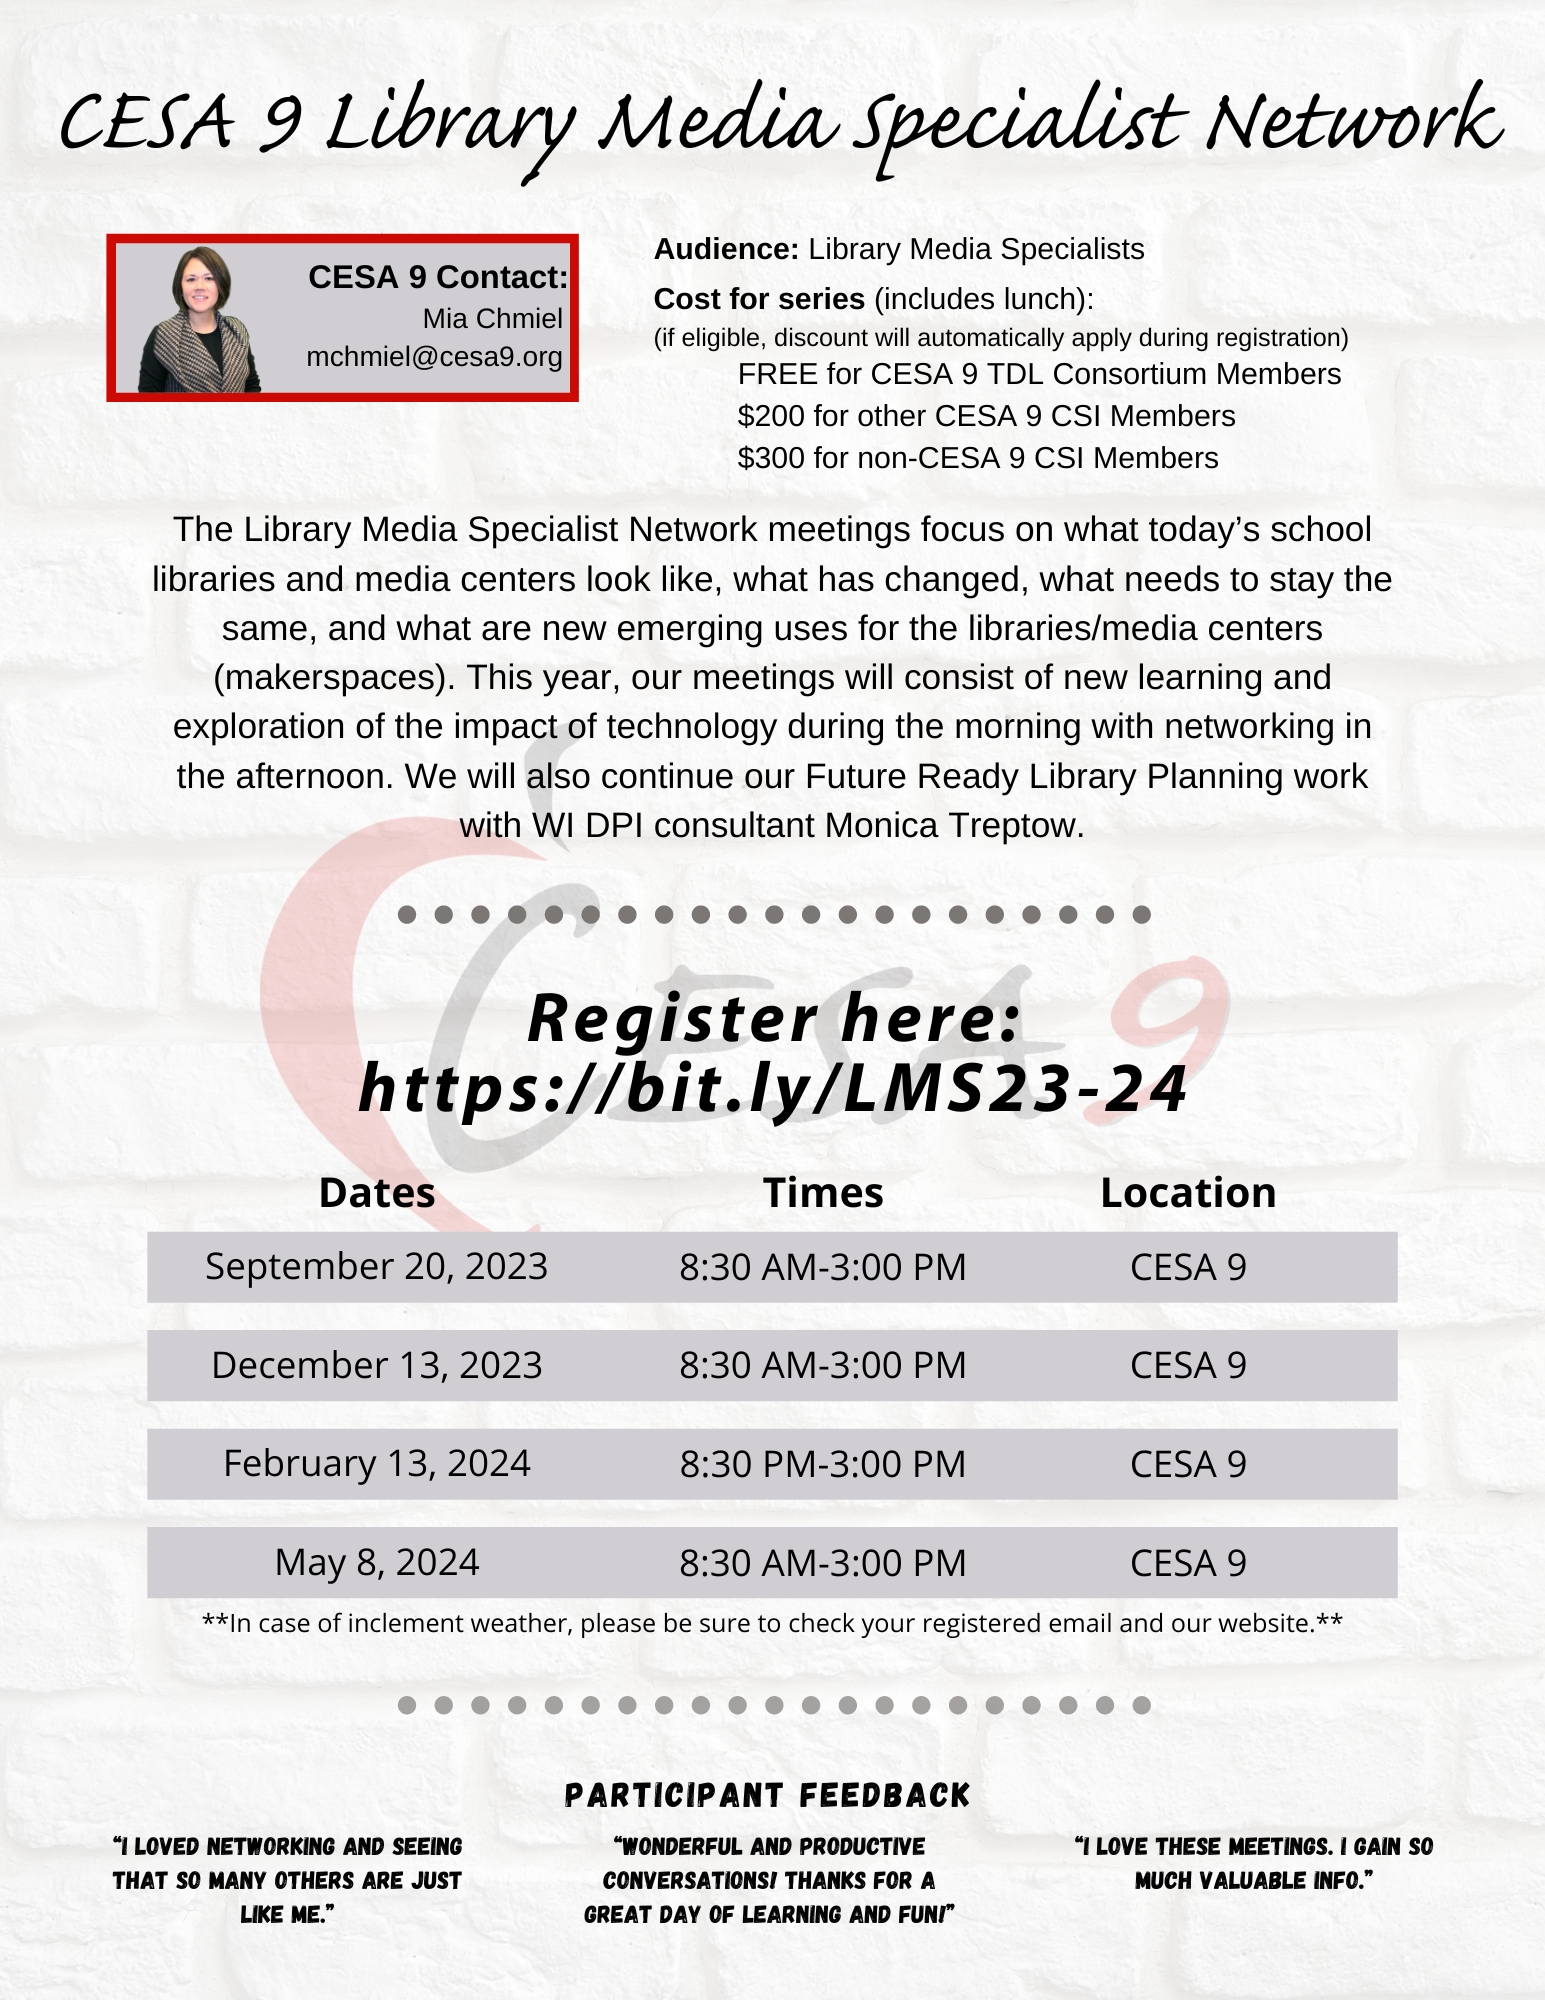 CESA 9 Library Media Specialist Network flyer image